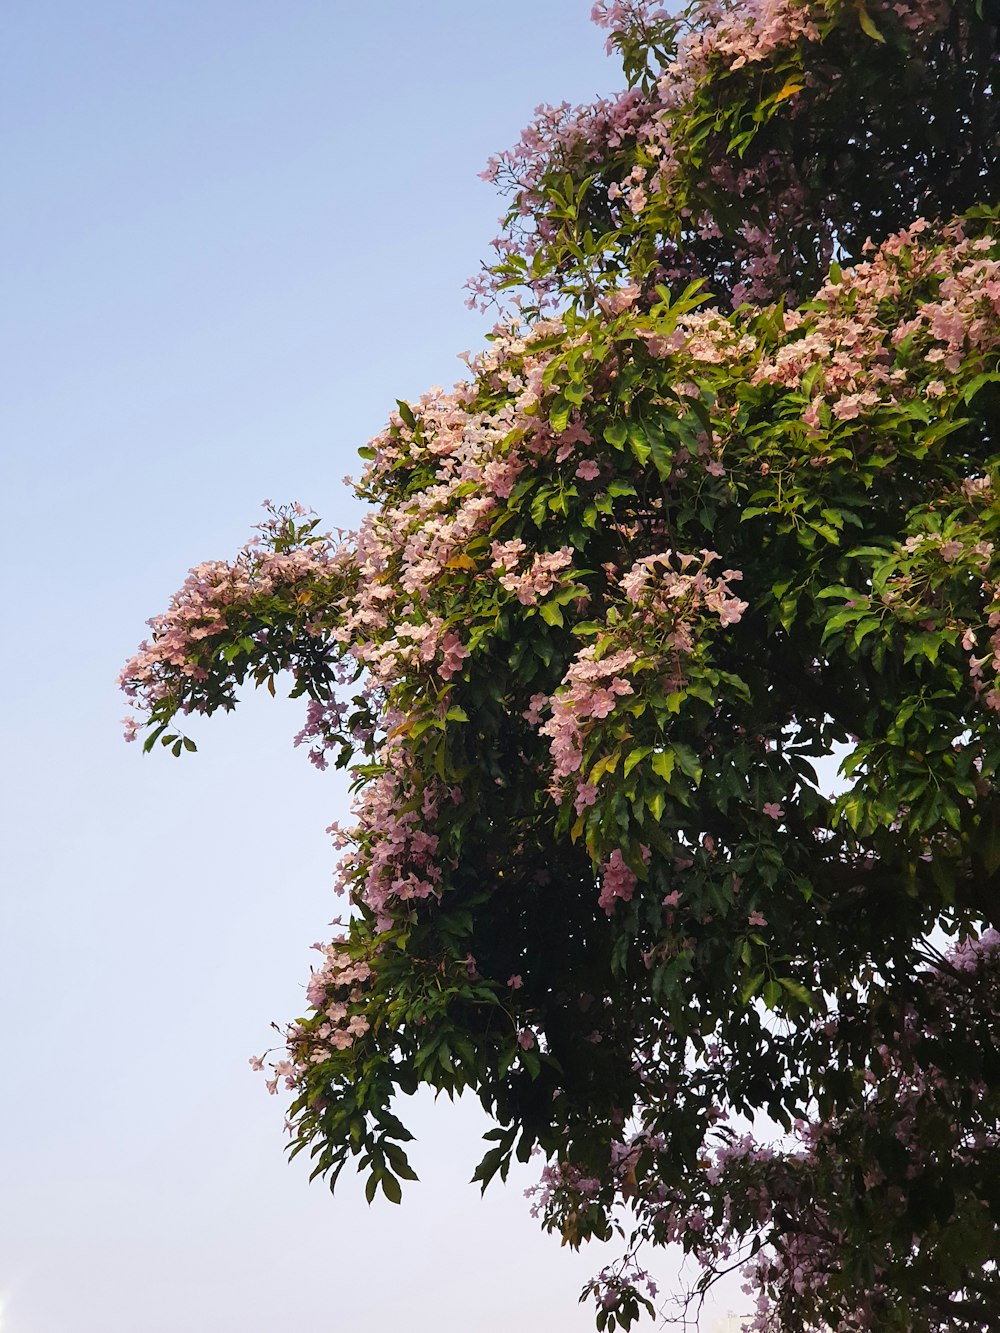 a large tree with purple flowers in front of a blue sky